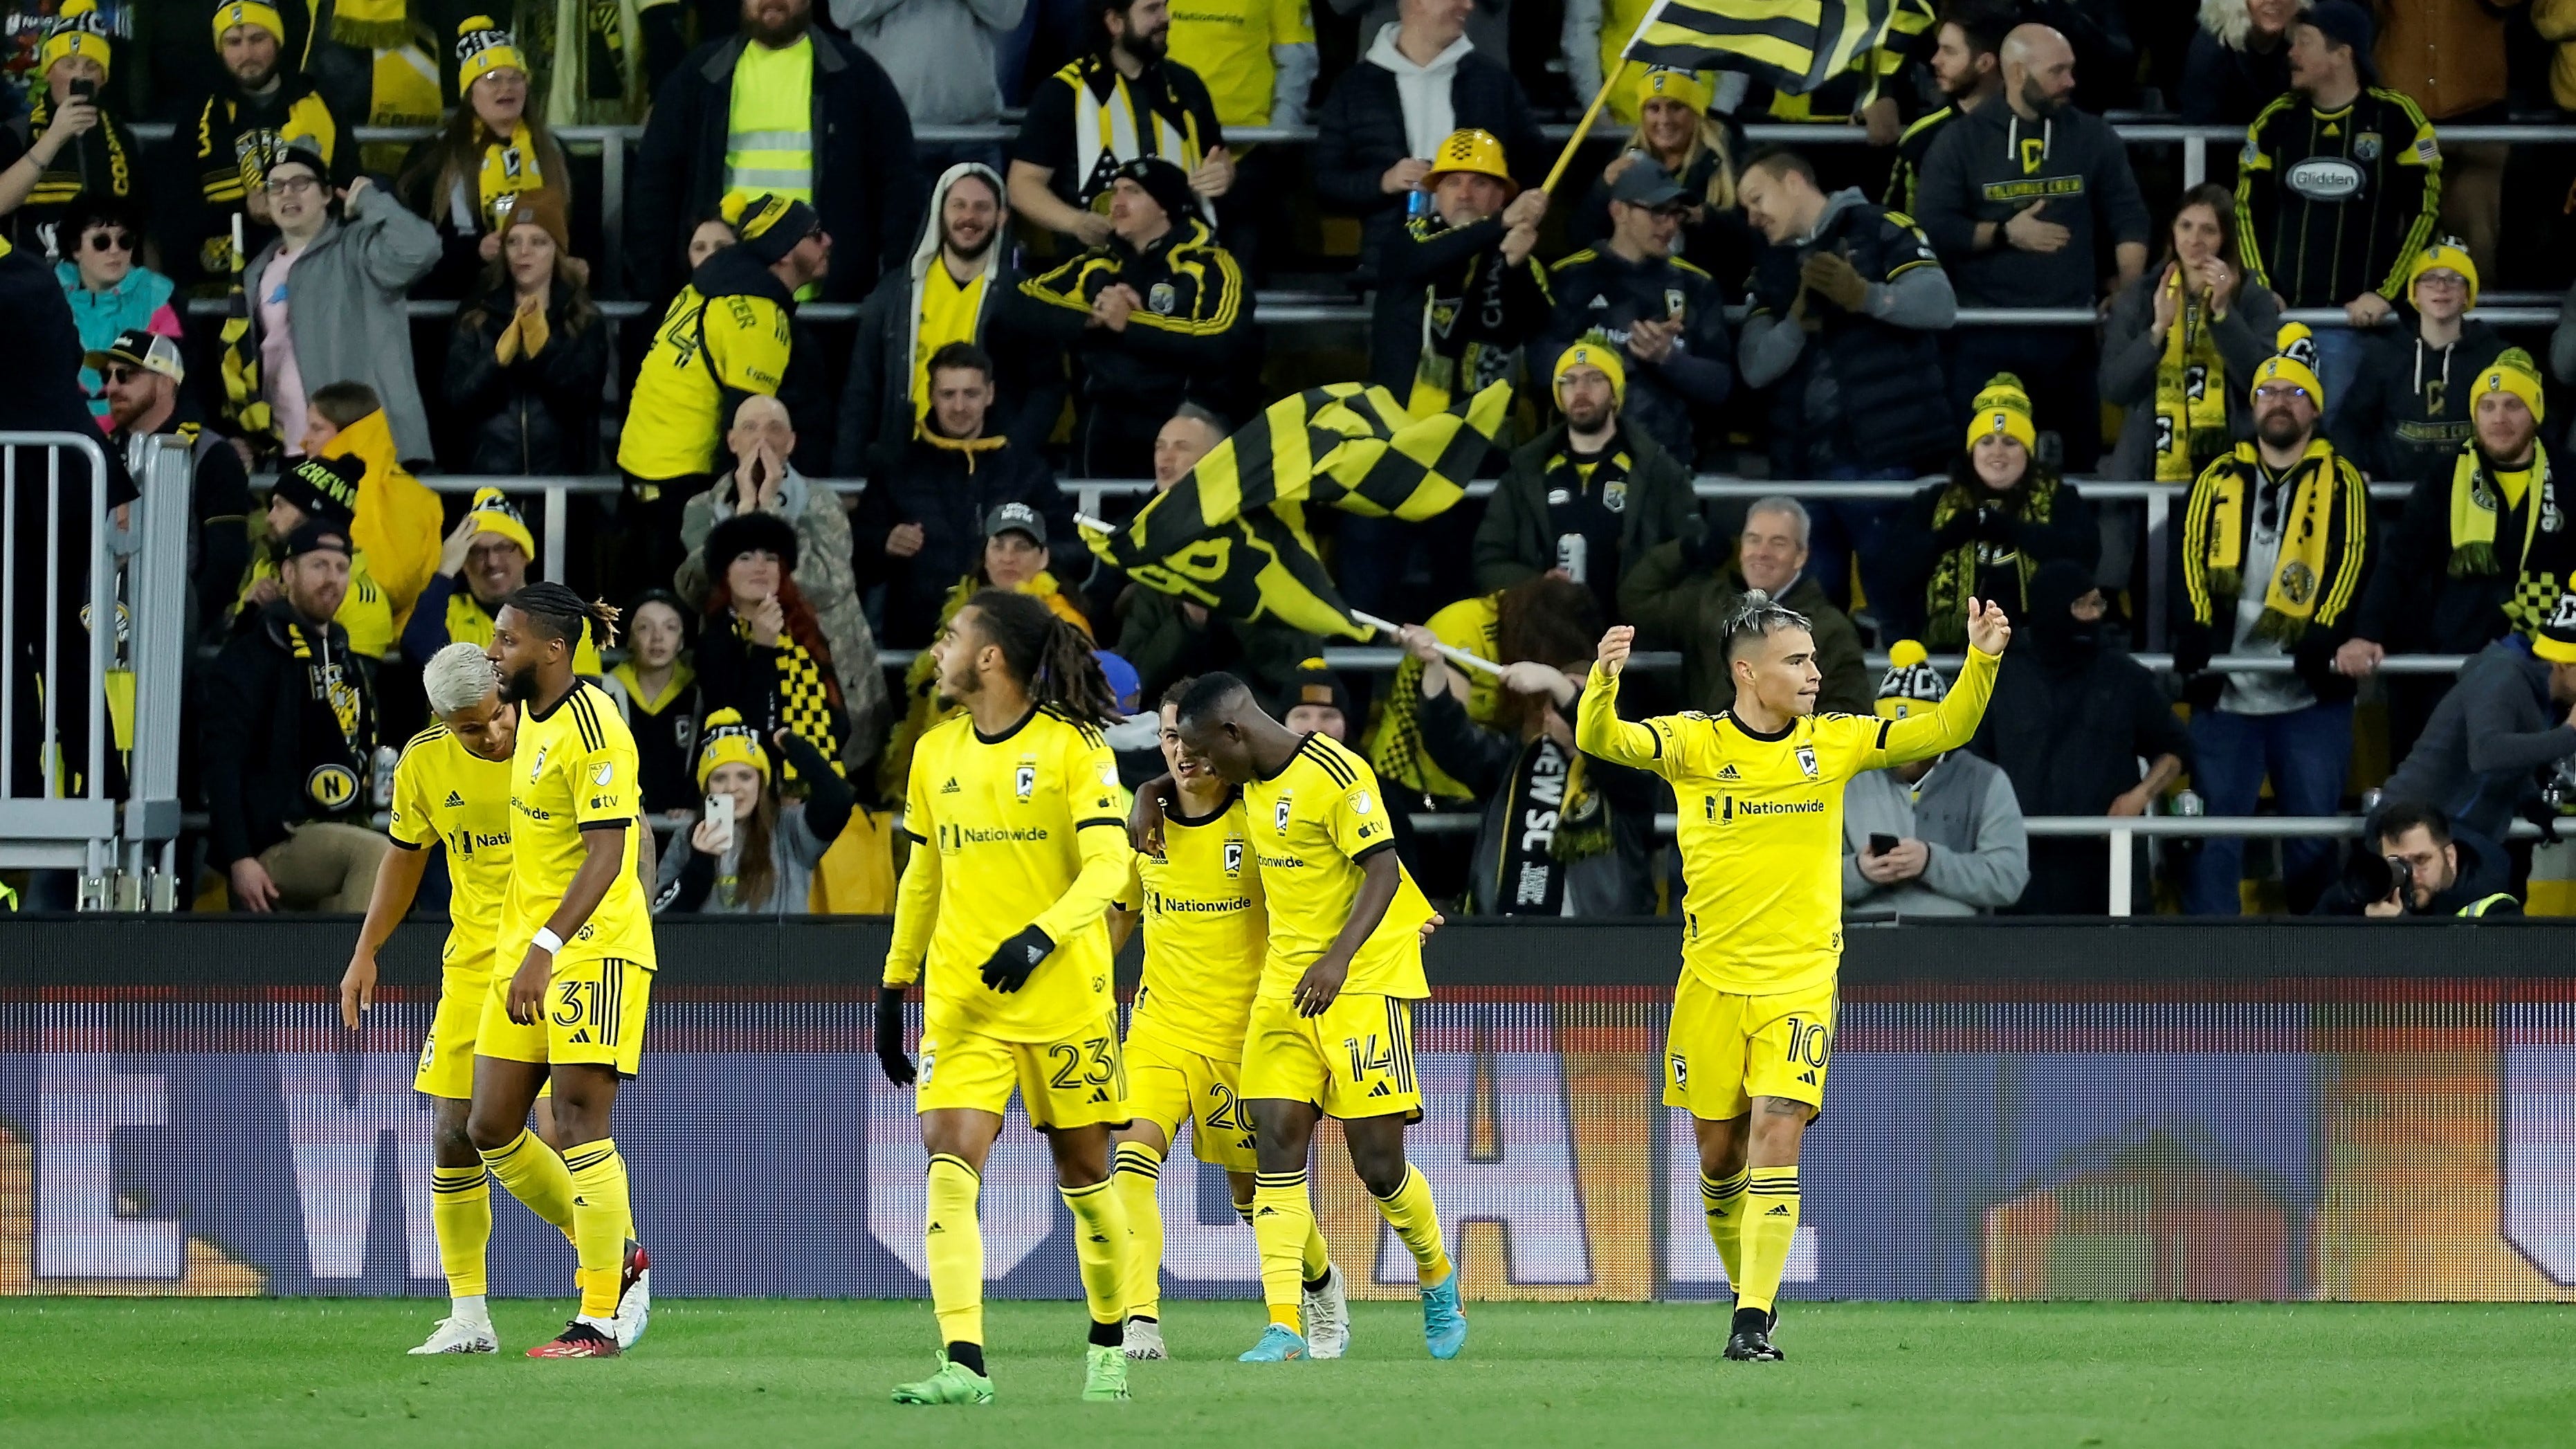 Columbus Crew vs Inter Miami Where to watch the match online, live